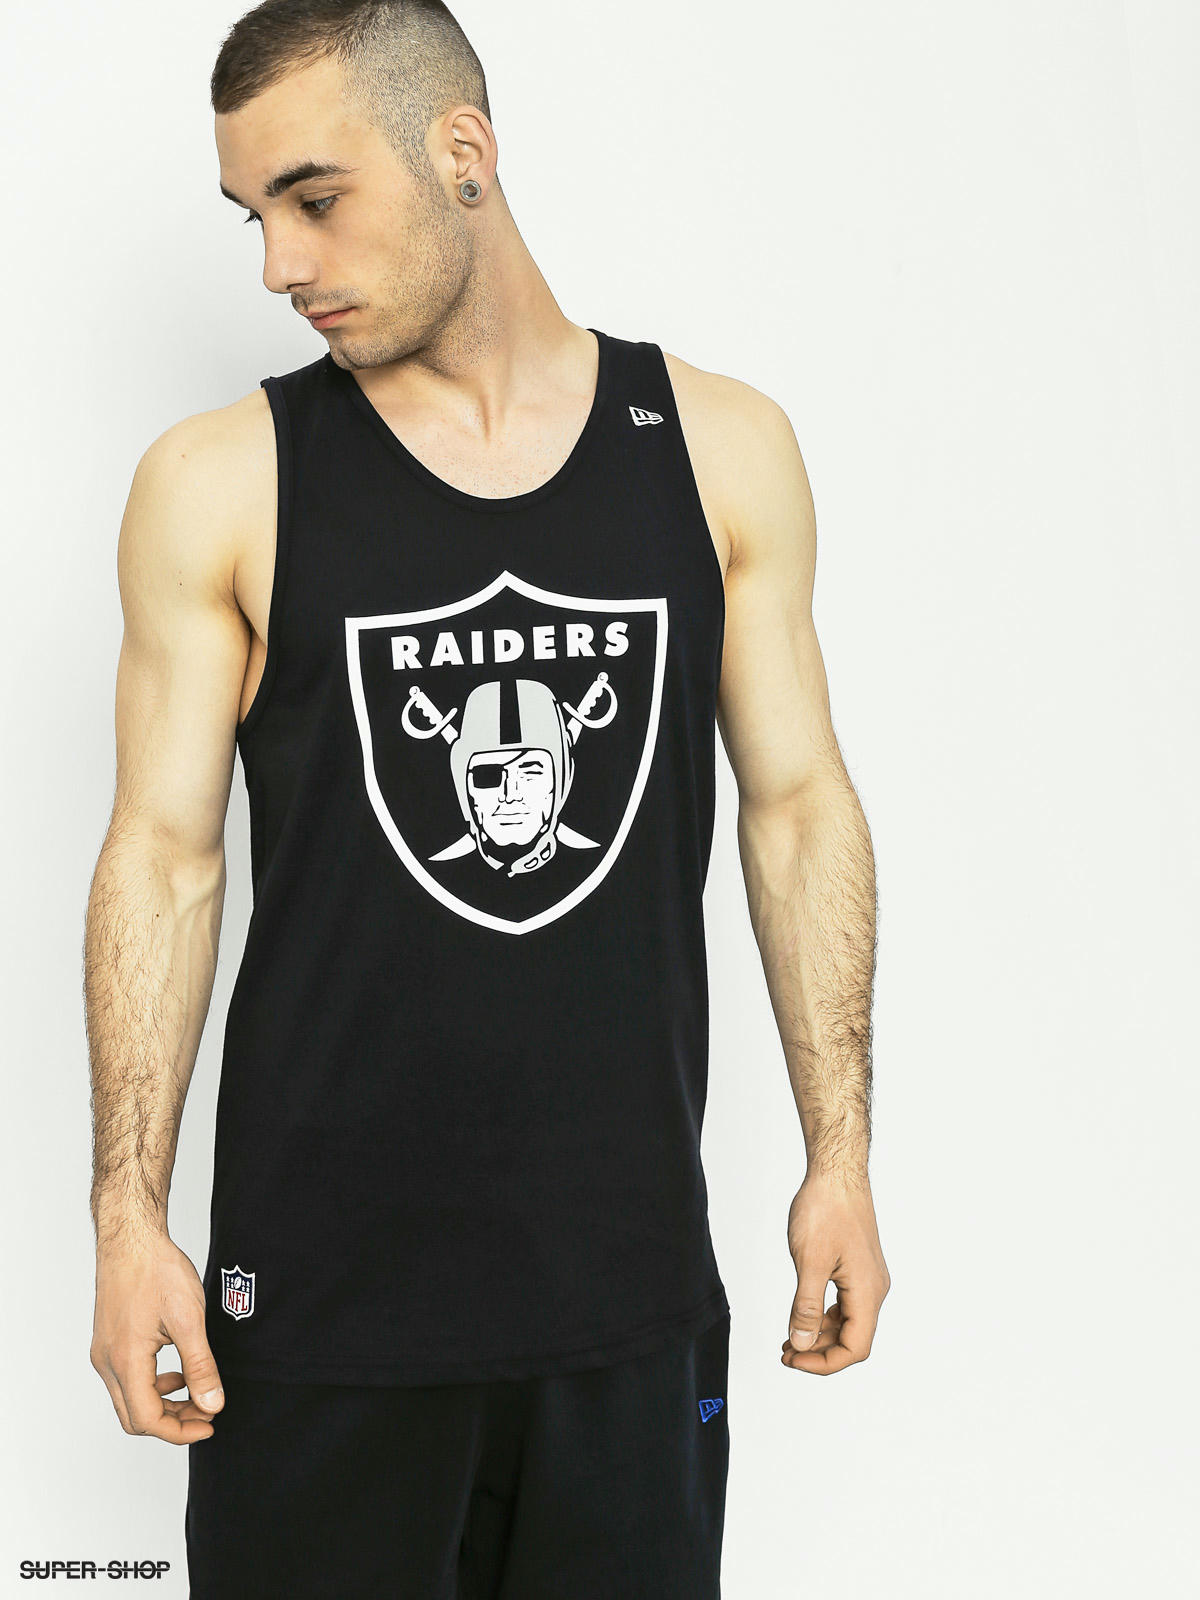 Raiders Muscle Shirt Sale Online, SAVE 45% 